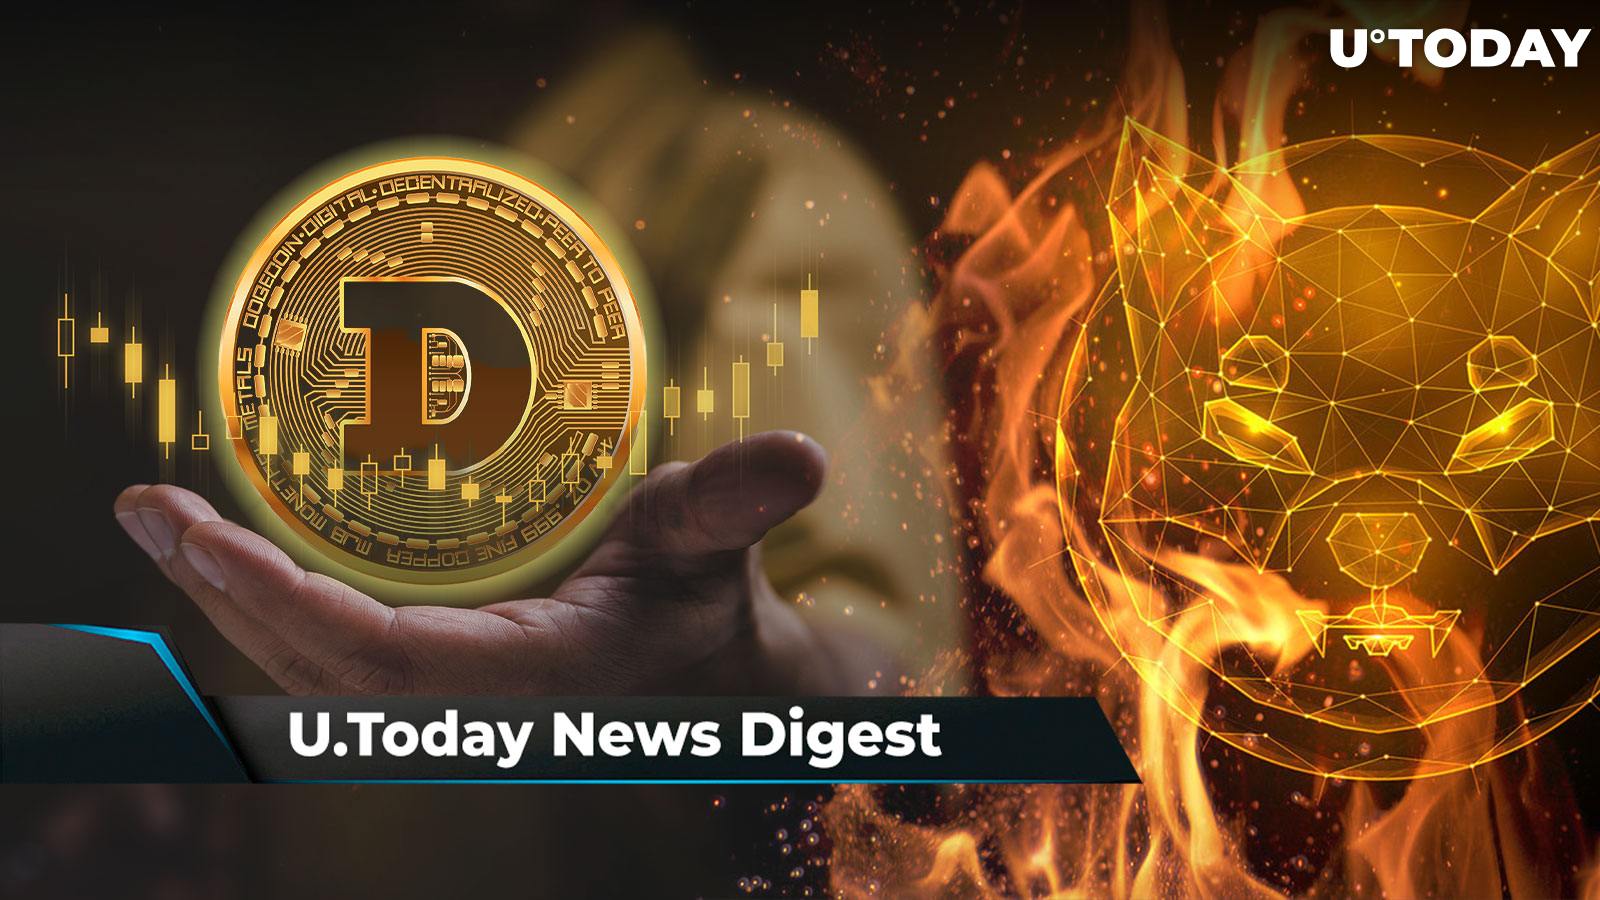 DOGE Transactions Go Parabolic, XRP Holders' Lawyer Predicts FOMO Will Start at $2, SHIB Burn Rate Jumps 1,450%: Crypto News Digest by U.Today